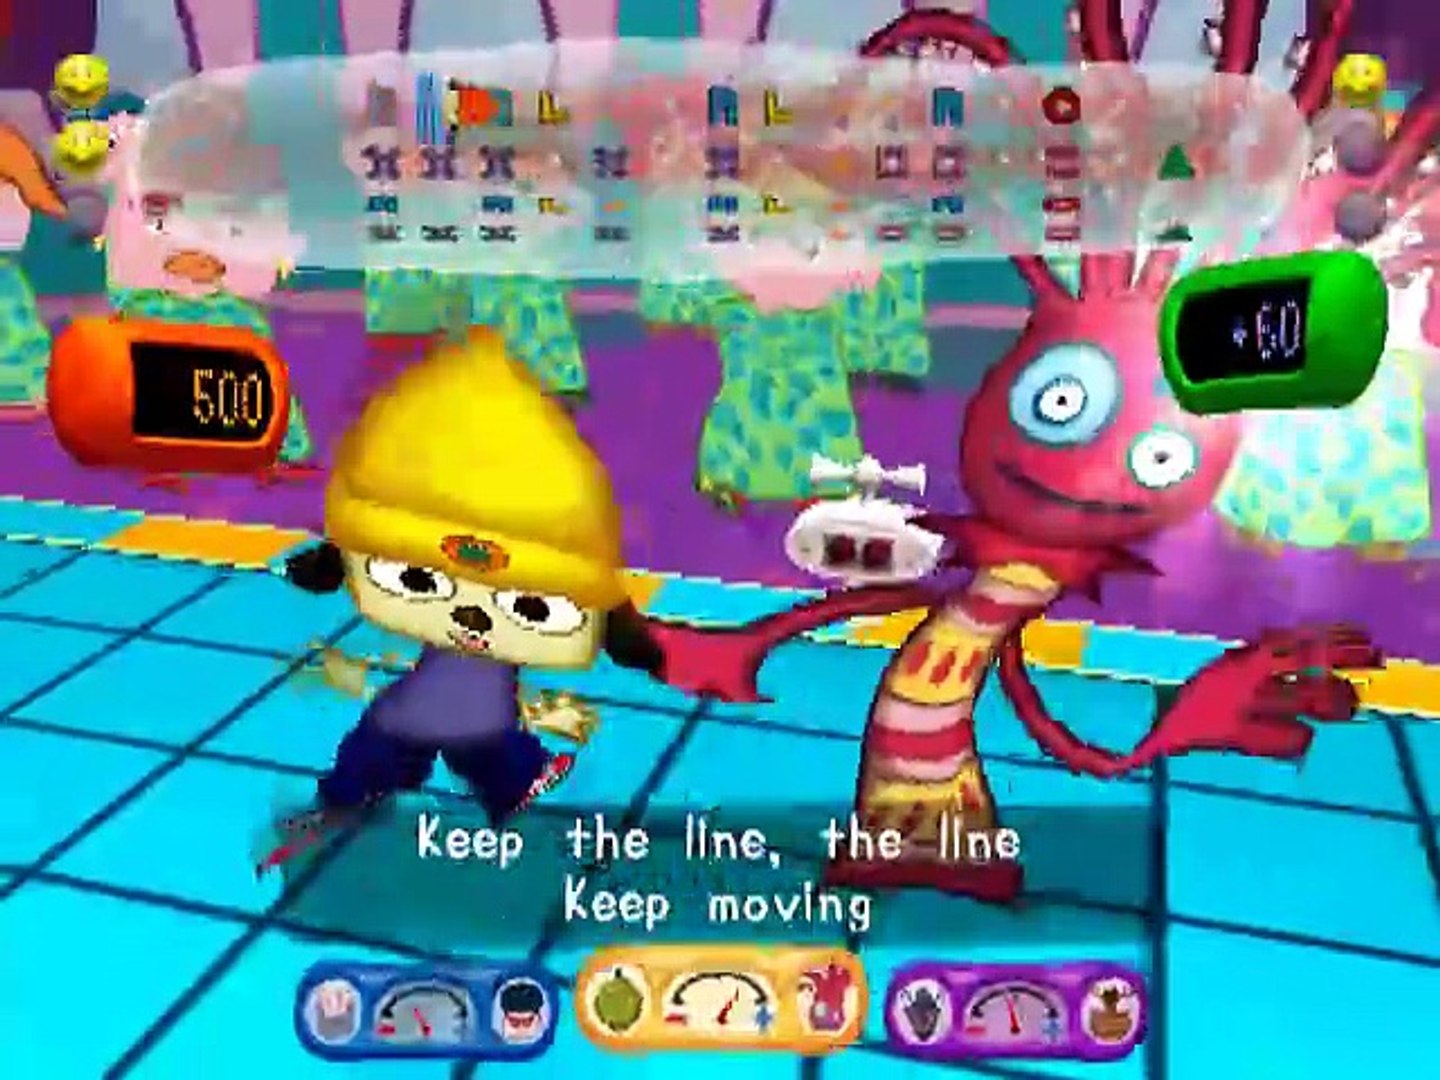 Stream Parappa The Rapper Anime Remix # 2 by Parappa